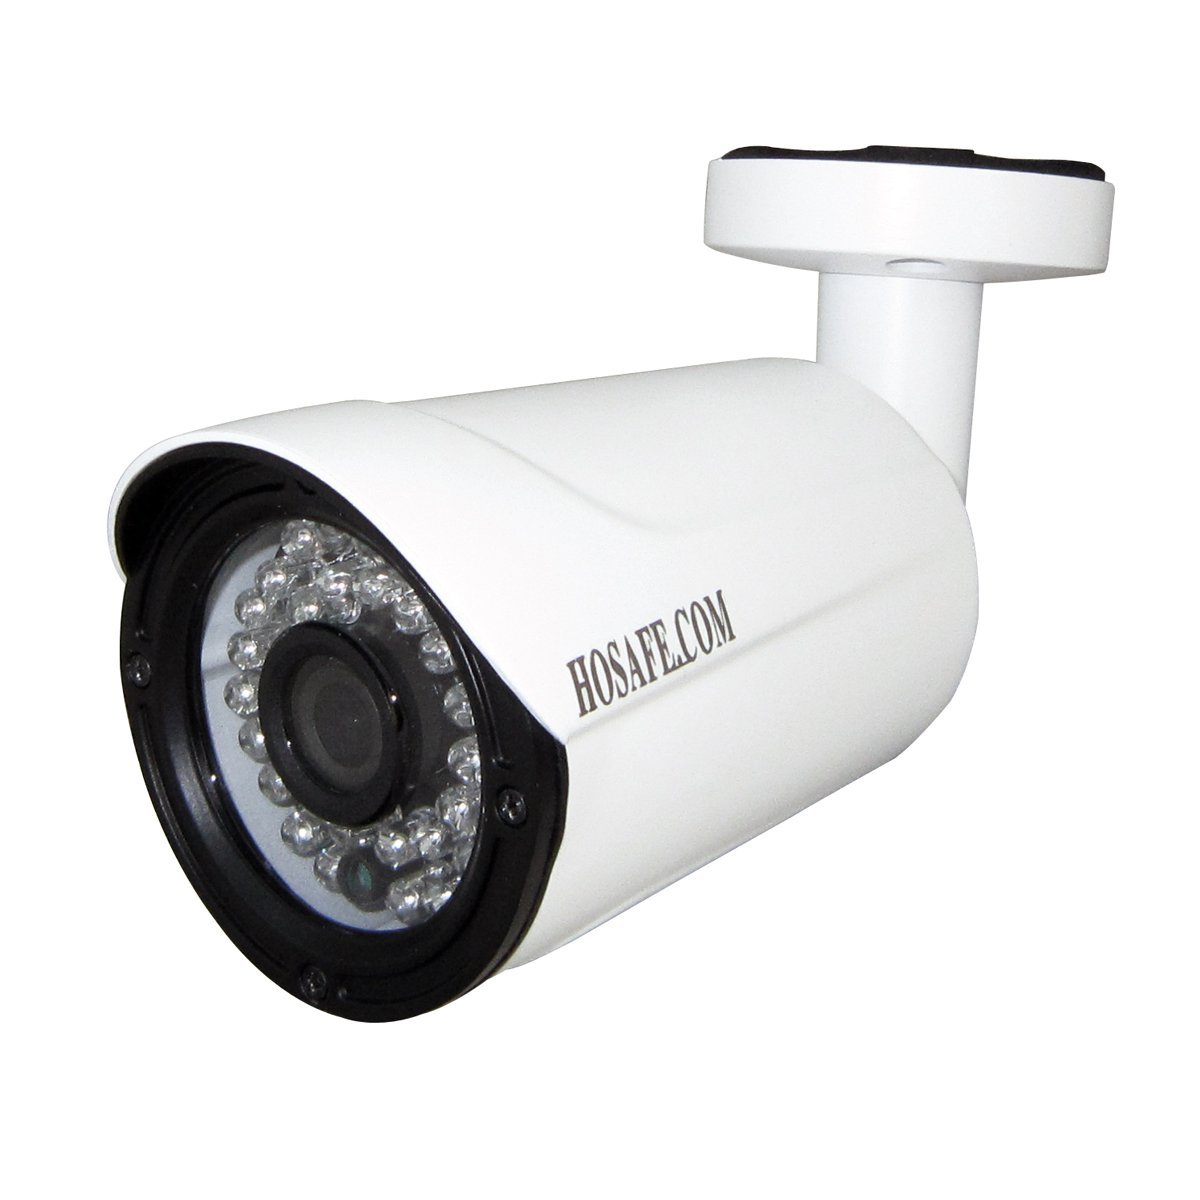 3 HOSAFE X2MB1W 1080P POE Outdoor IP Camera ONVIF Motion Detection Email Alert, Working with Blue Iris, iSpy, Synology etc